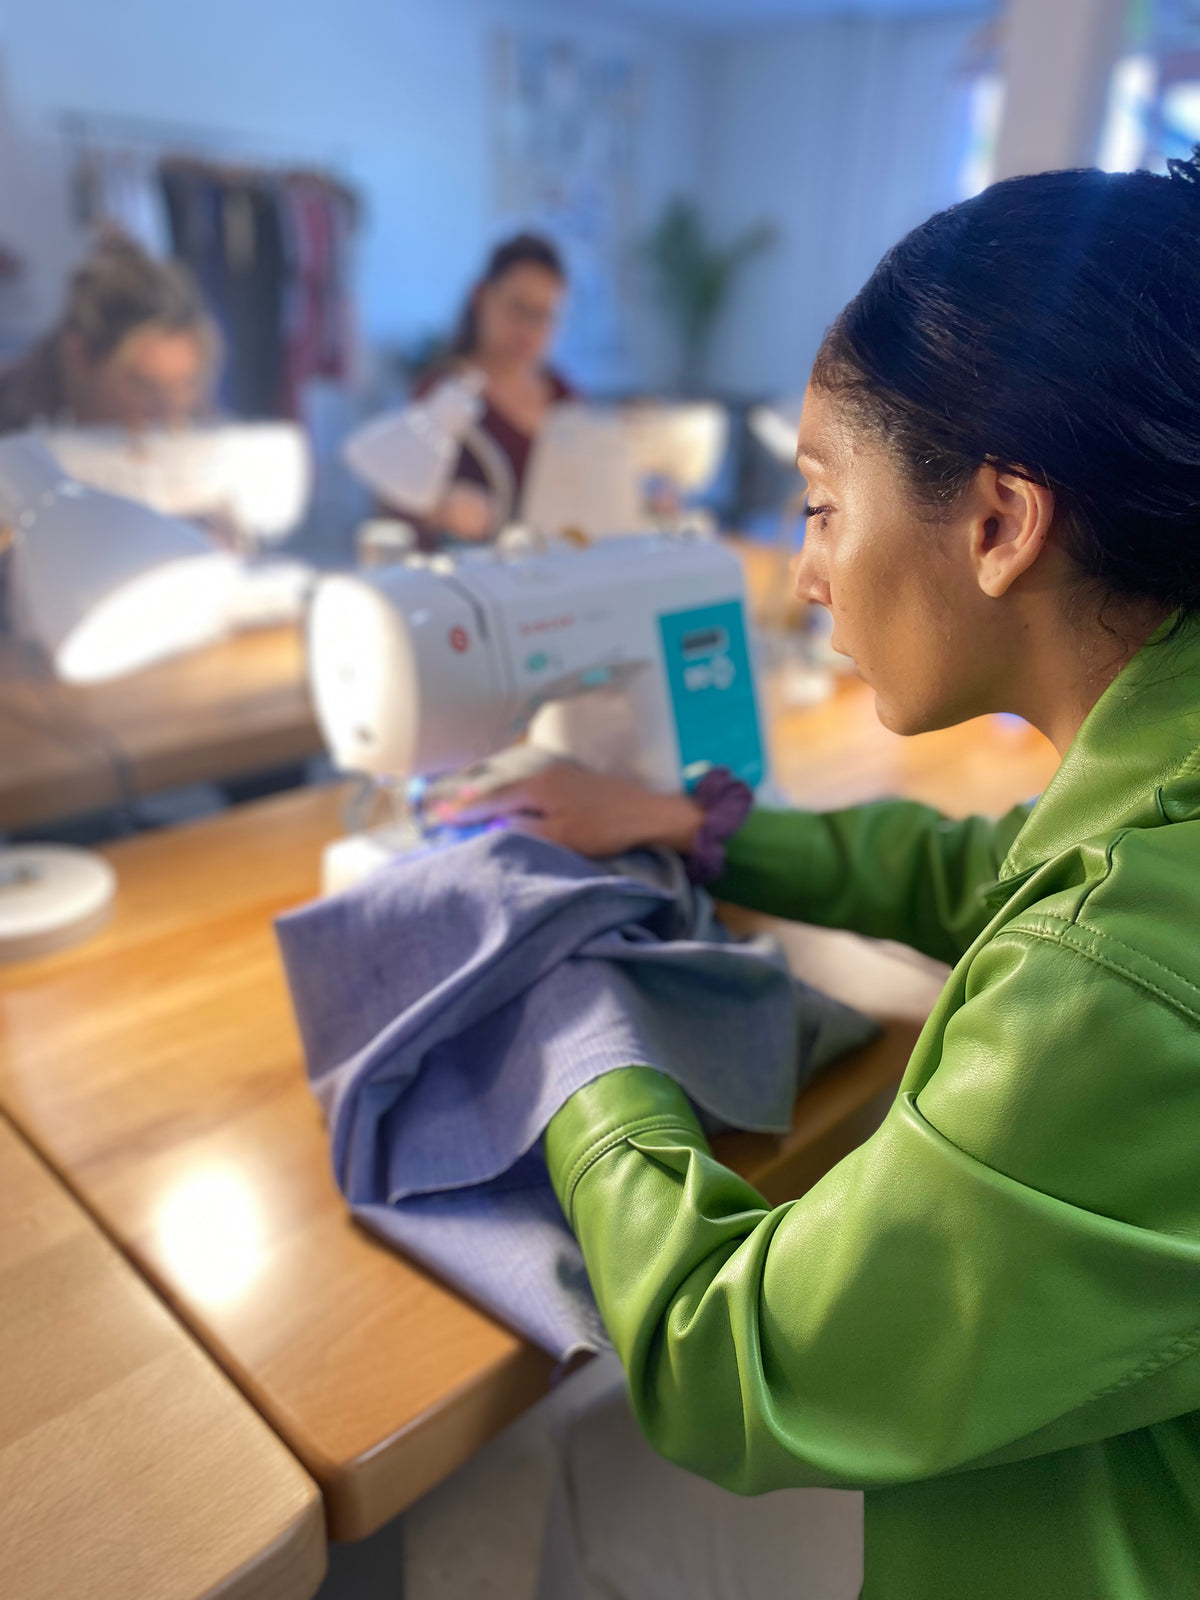 Intro to Sewing